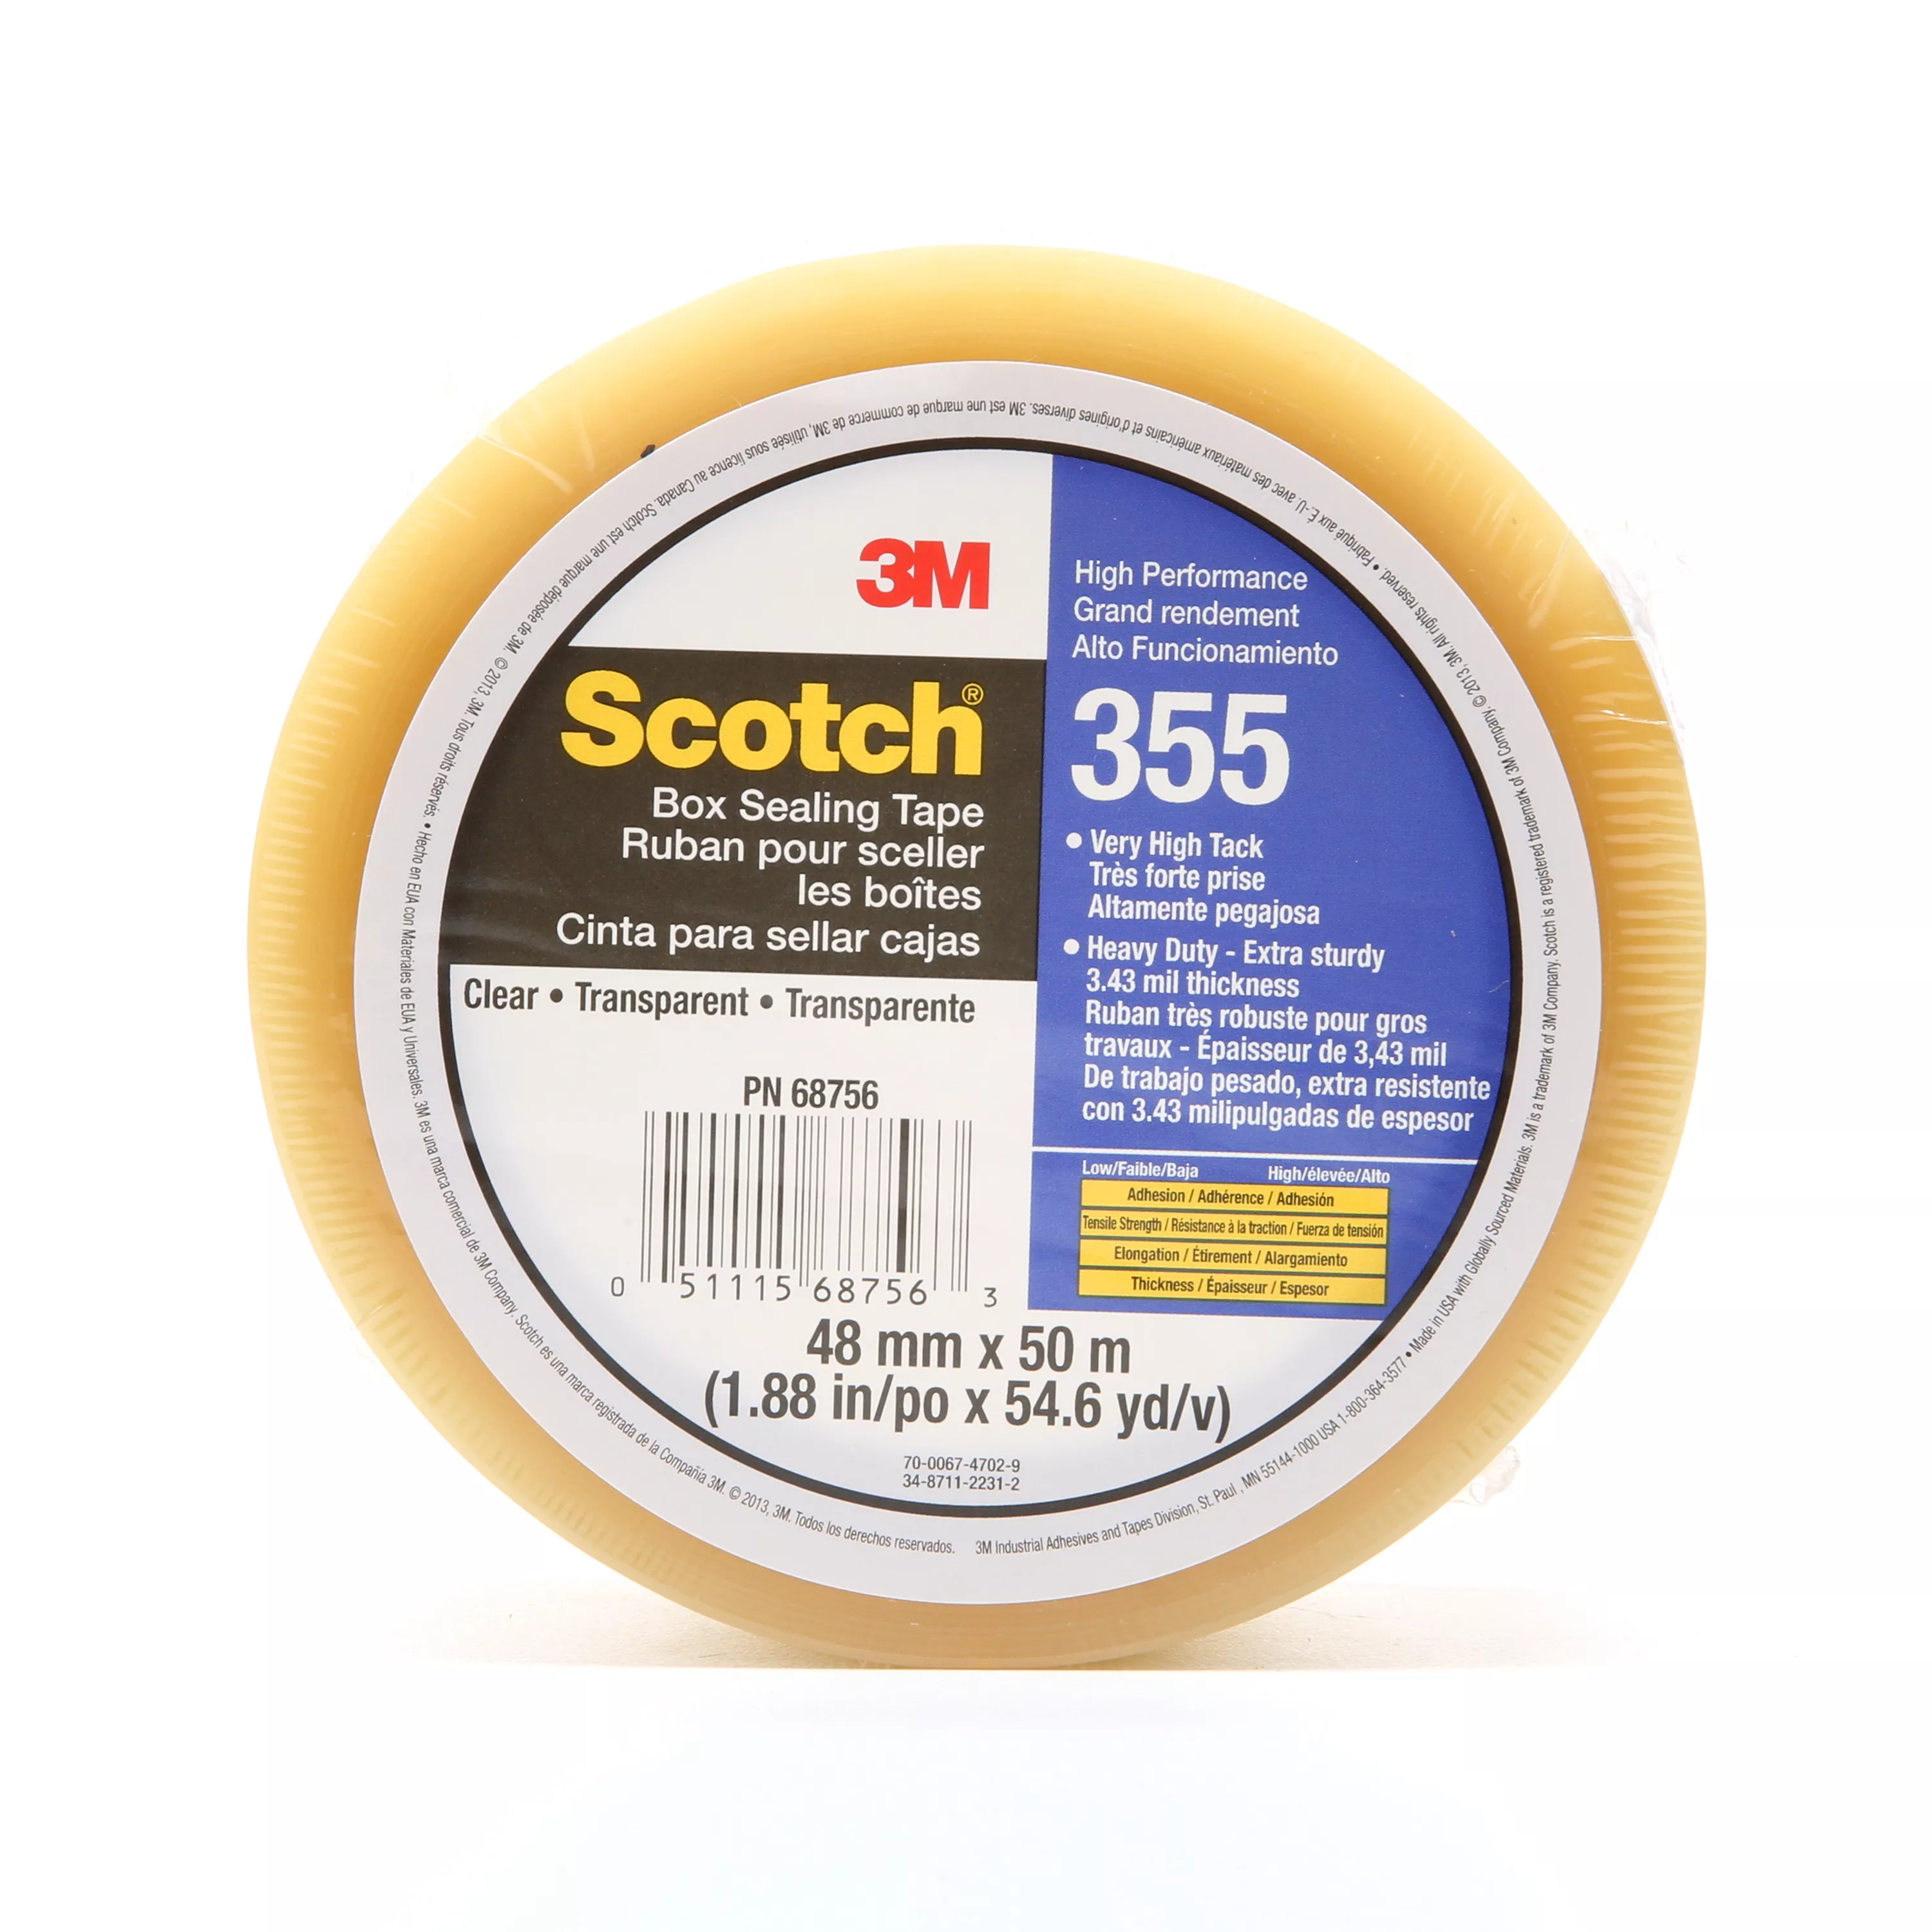 Scotch® Box Sealing Tape 355, Clear, 48 mm x 50 m, 36/Case, Individually
Wrapped Conveniently Packaged